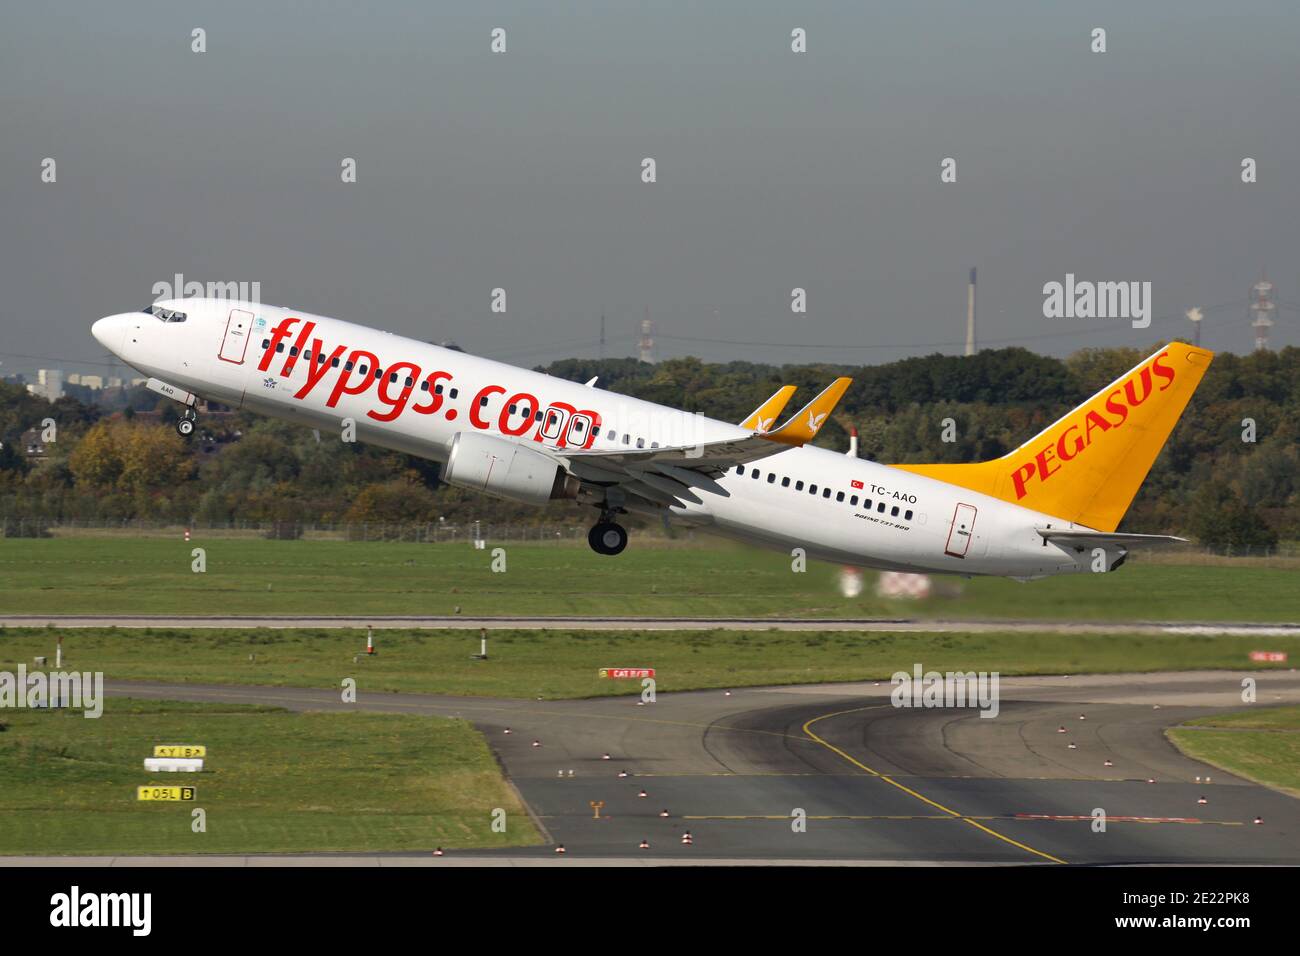 Turkish Pegasus Airlines Boeing 737-800 with registration TC-AAO just departed from runway 23L of Dusseldorf Airport. Stock Photo